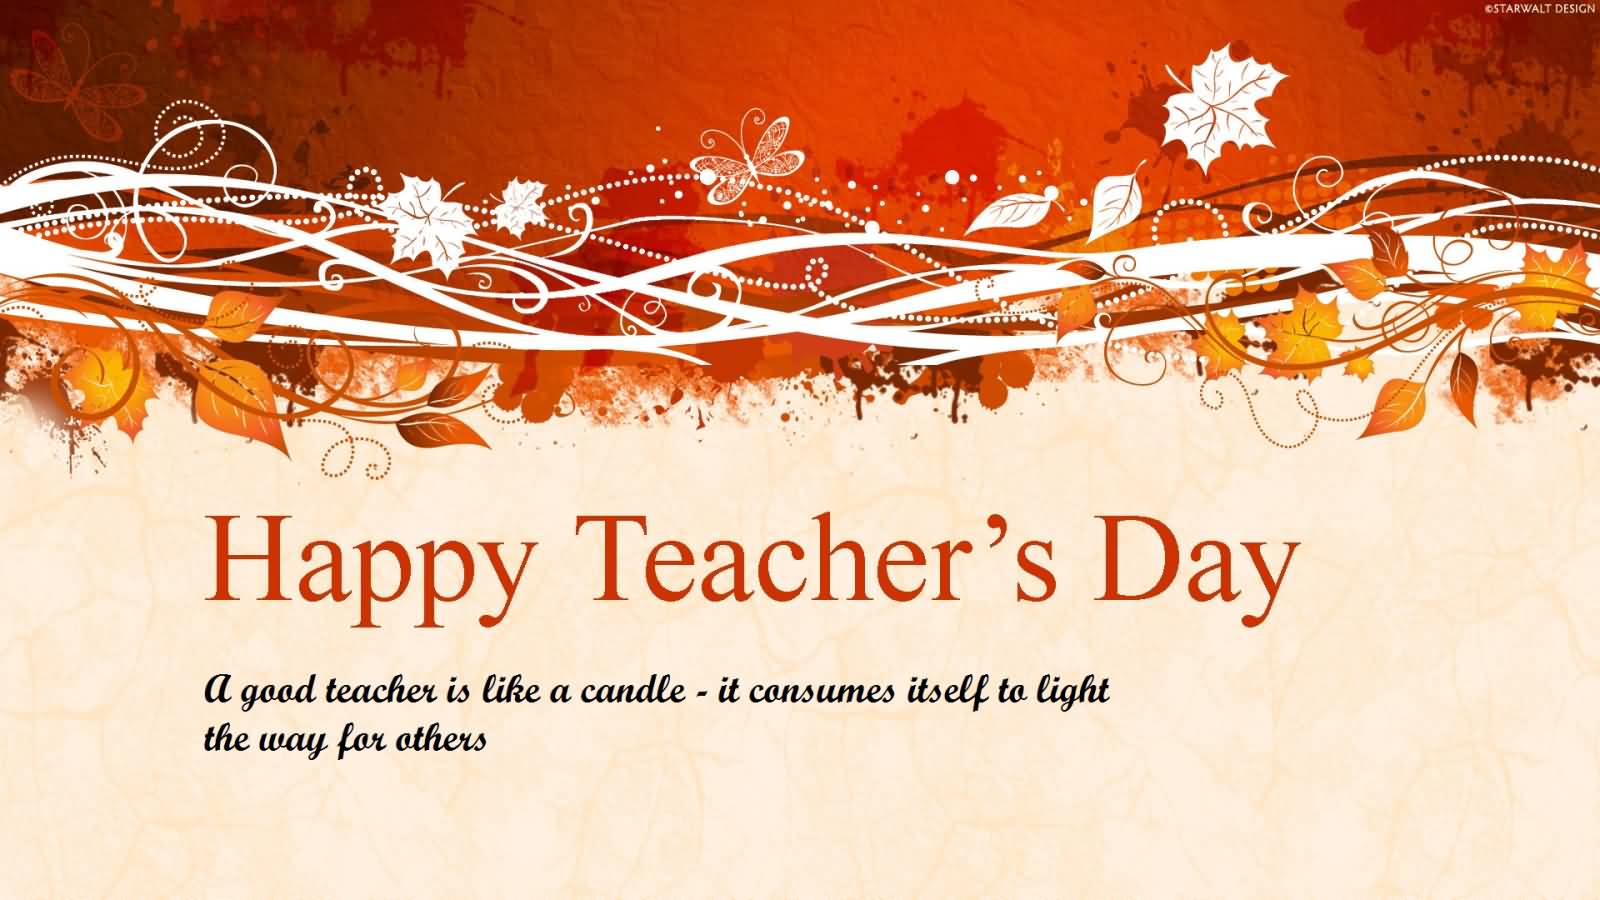 Best Teachers Day Wish Picture And Image